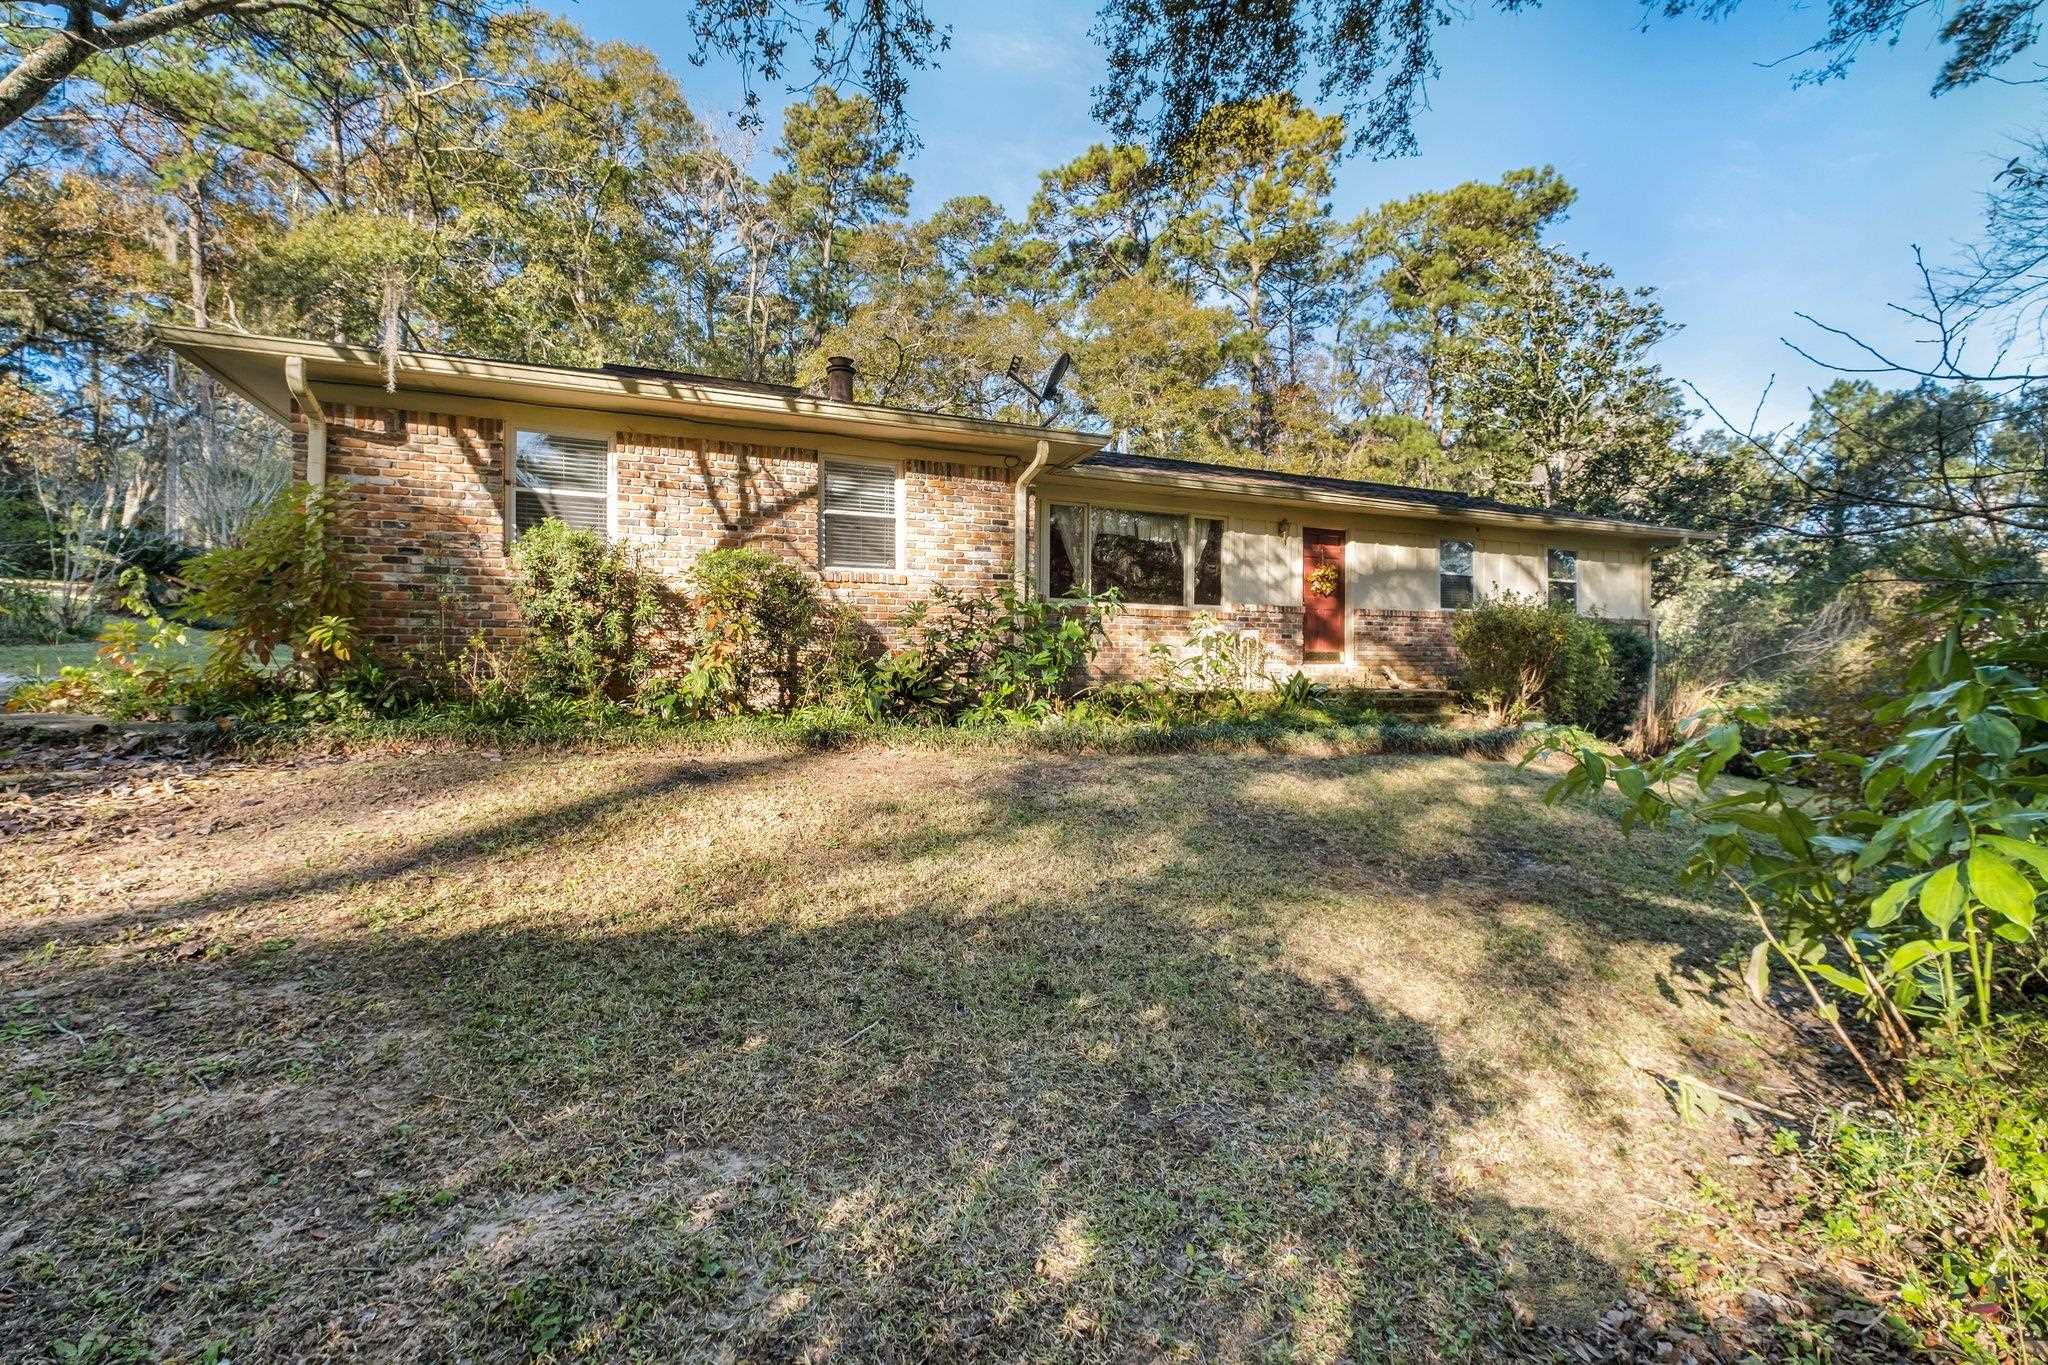 3510 Sharer Road,TALLAHASSEE,Florida 32312,3 Bedrooms Bedrooms,2 BathroomsBathrooms,Detached single family,3510 Sharer Road,368380